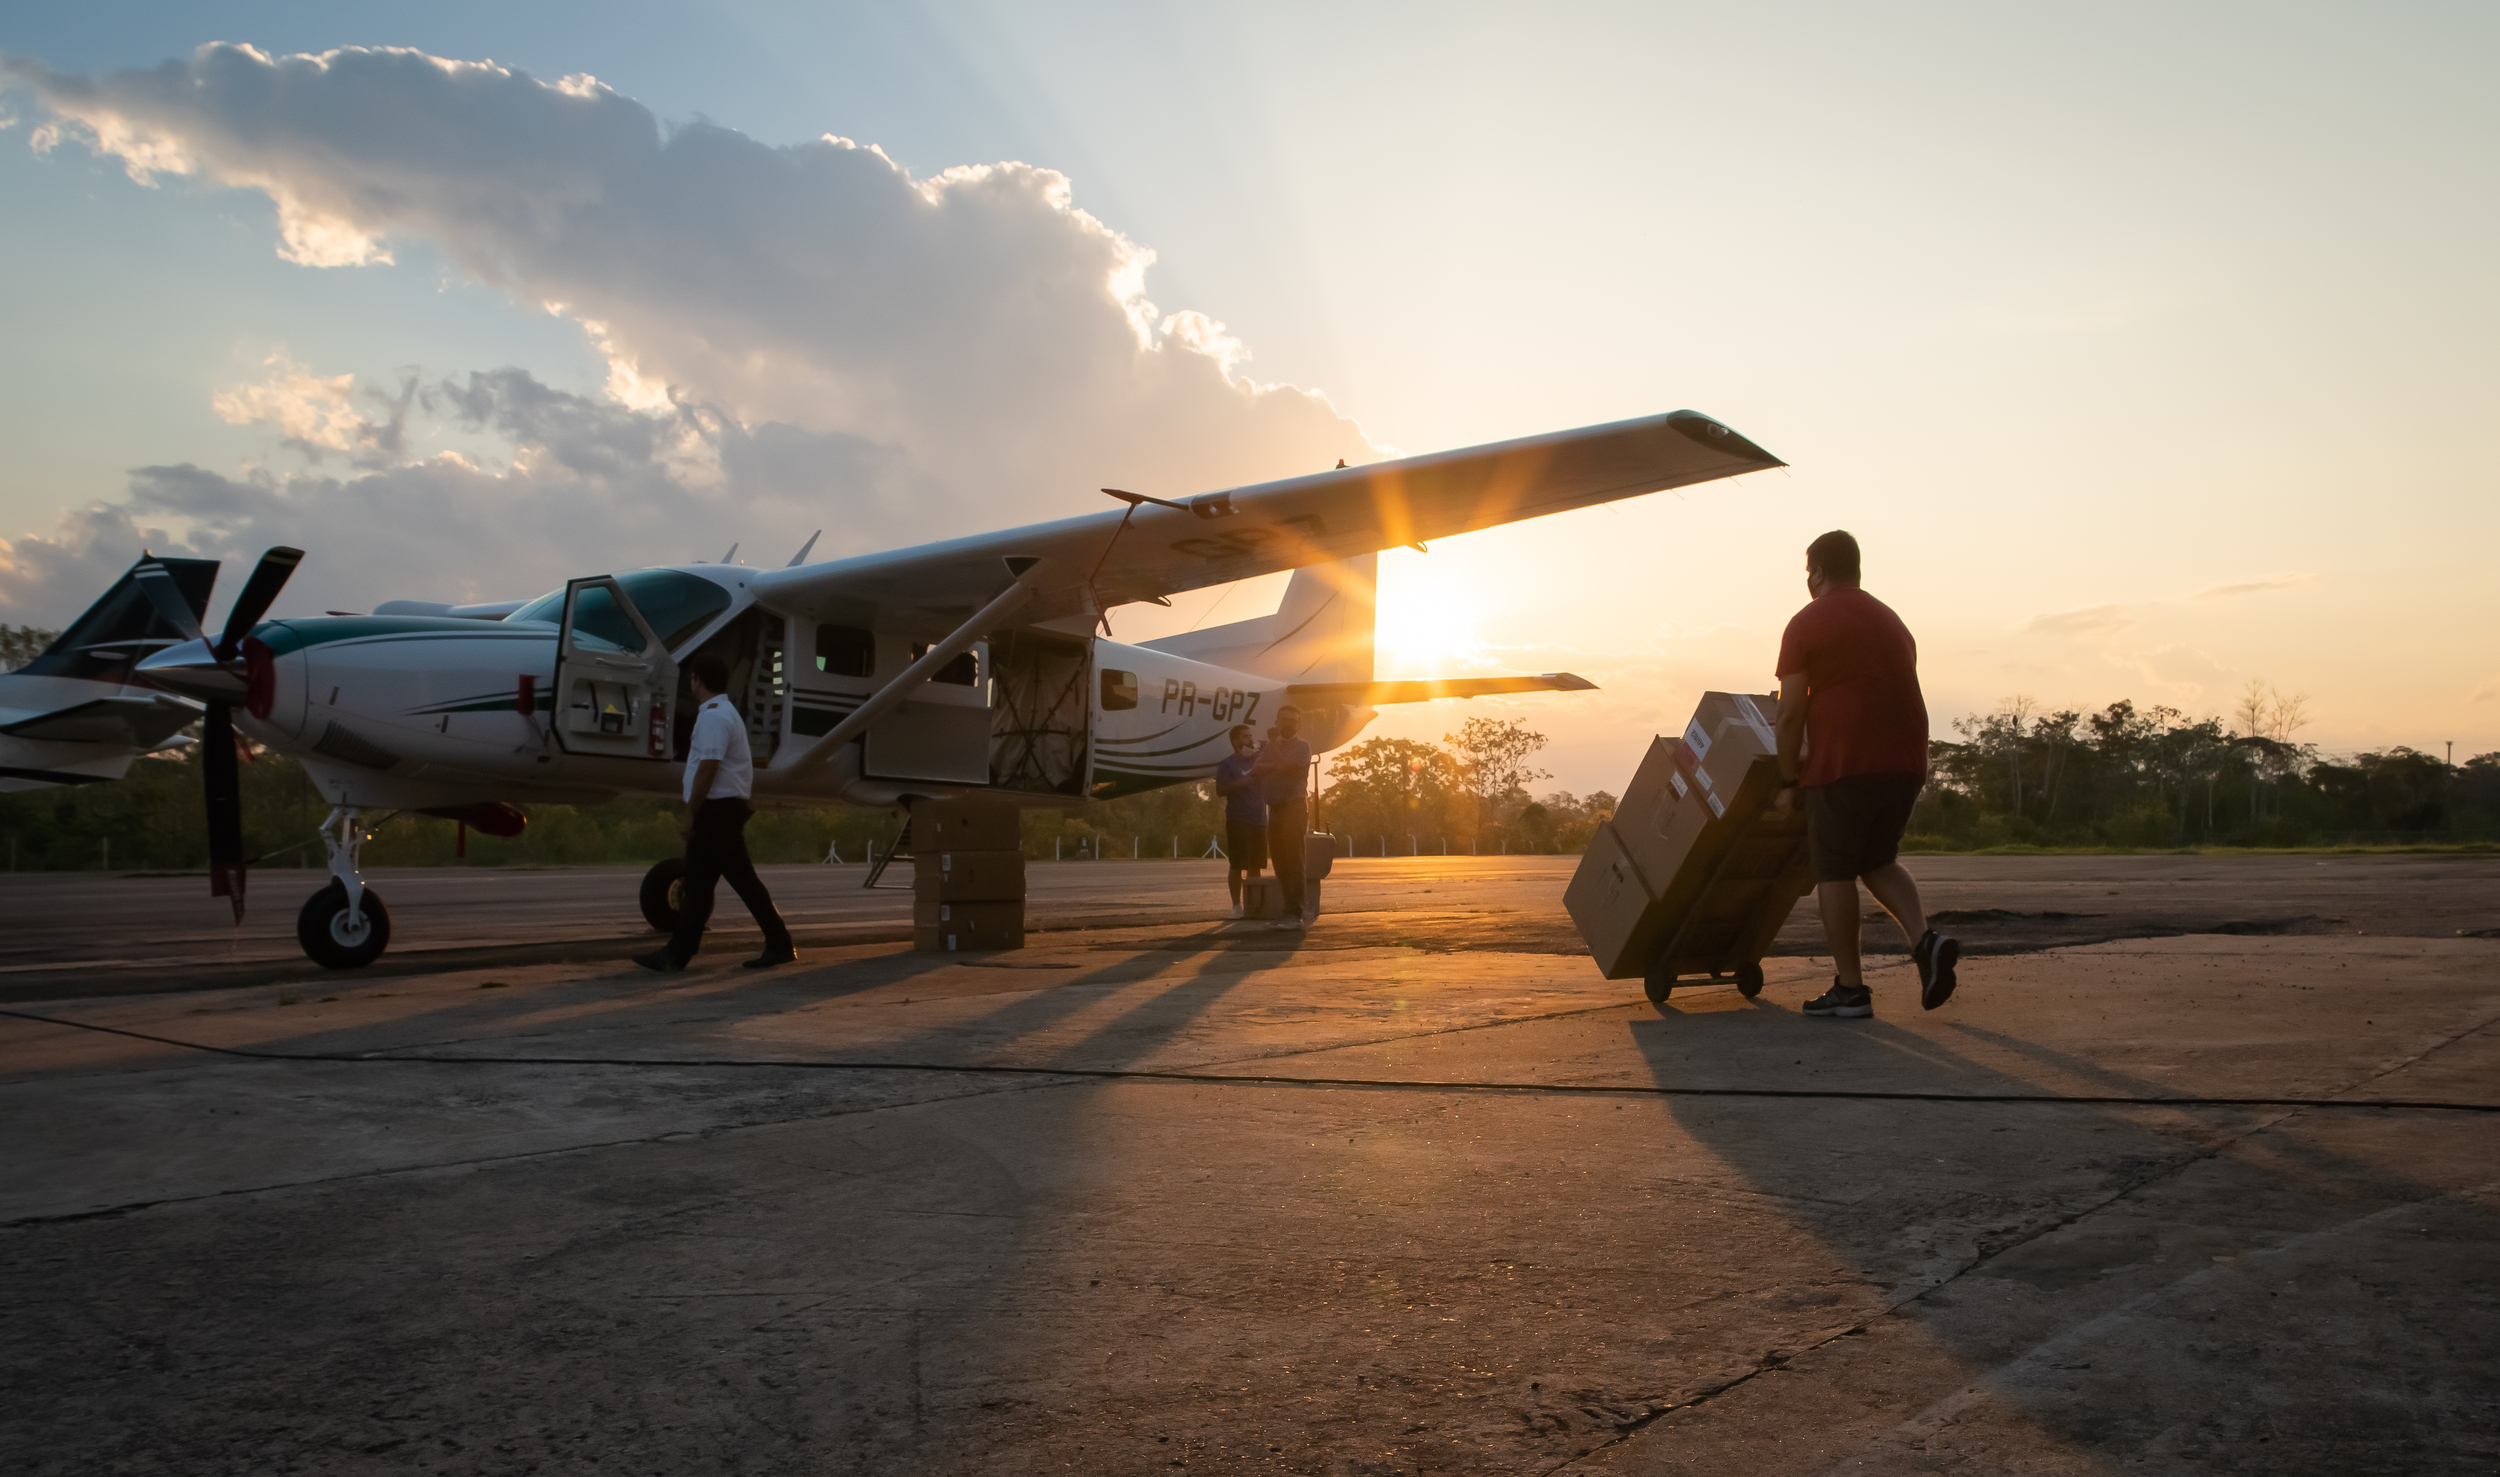 The sun sets behind a small propellor plane, as a person pushes a trolley loaded with large cardboard boxes towards the open side door.